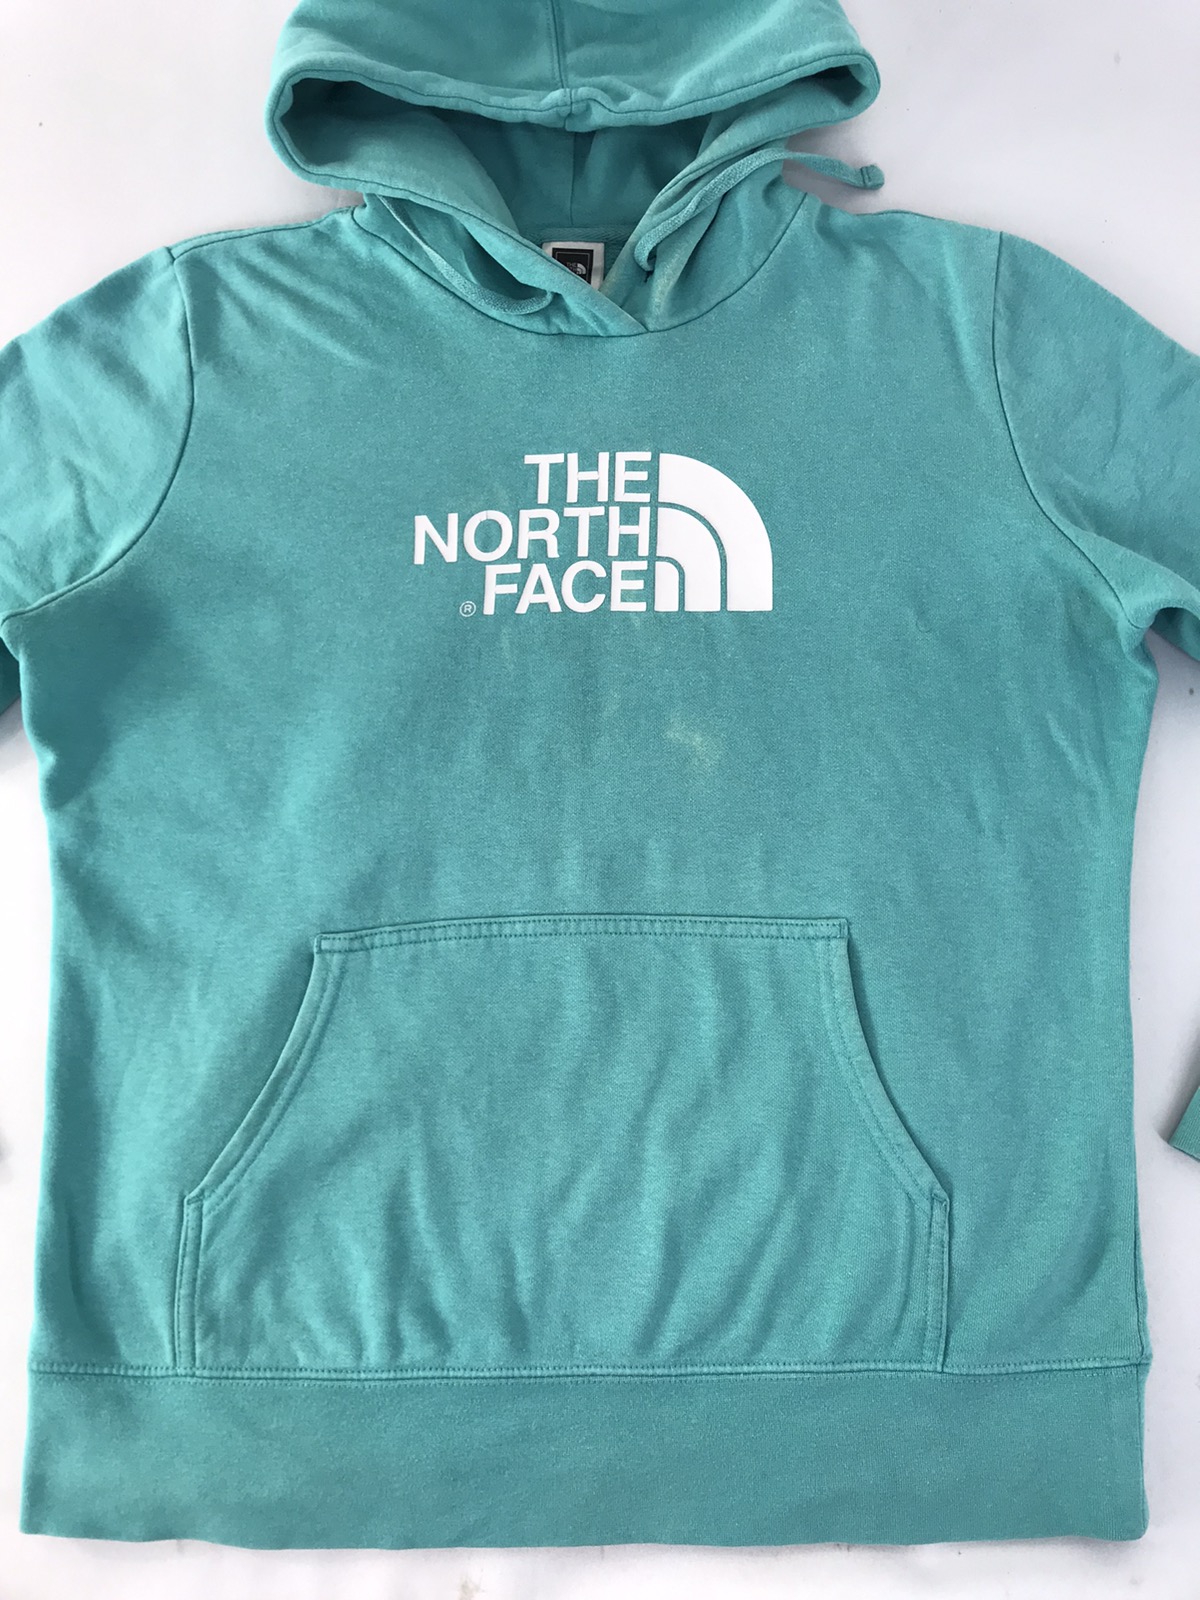 The North Face Pull Over Hoodies Brand Box Logo - 3